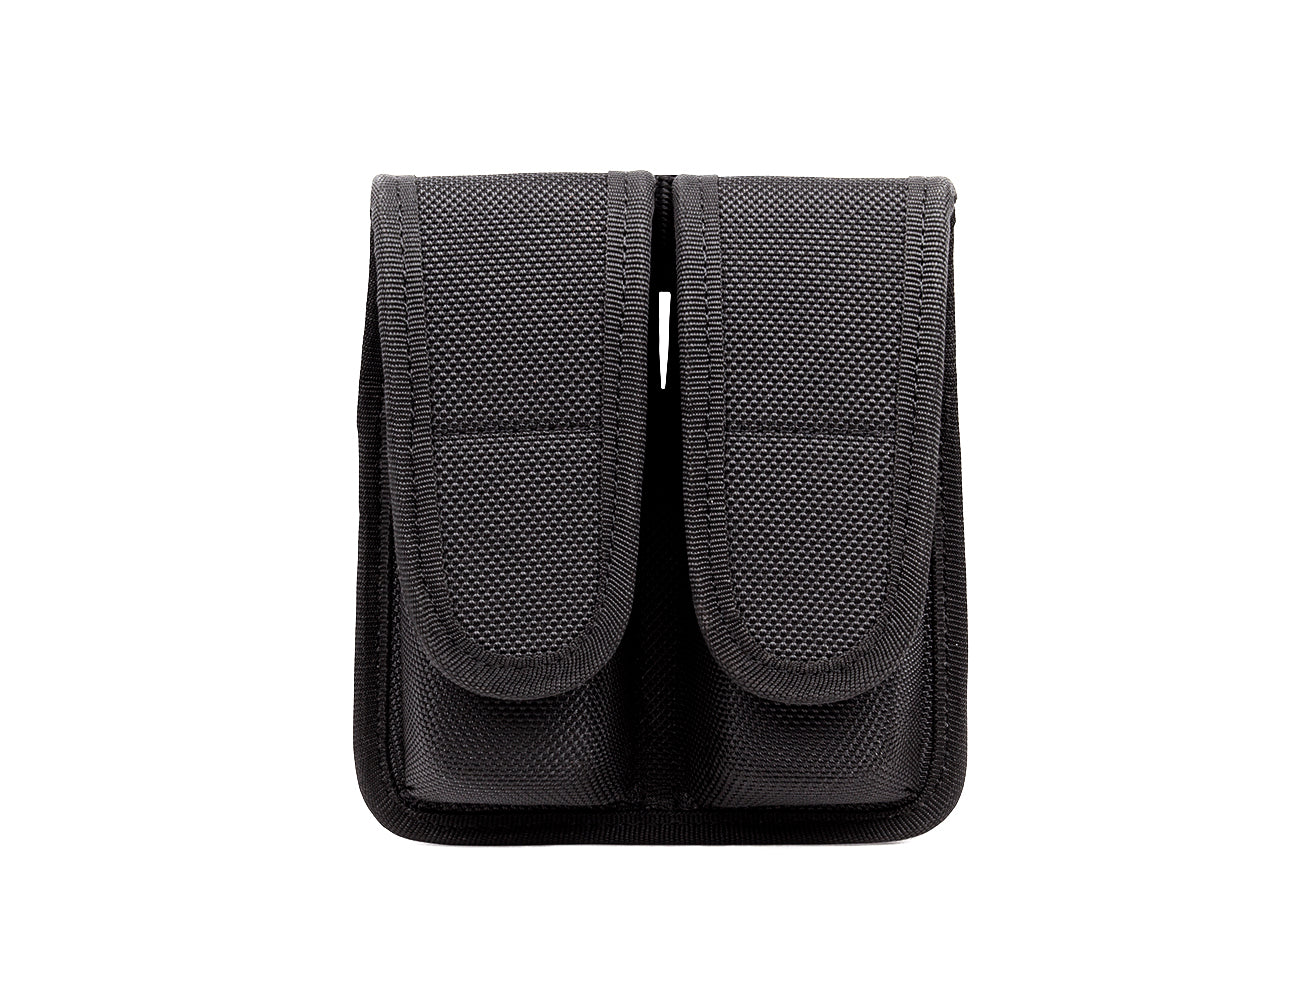 Molded magazine pouch fits two magazines, can be worn horizontal or vertical on belt.